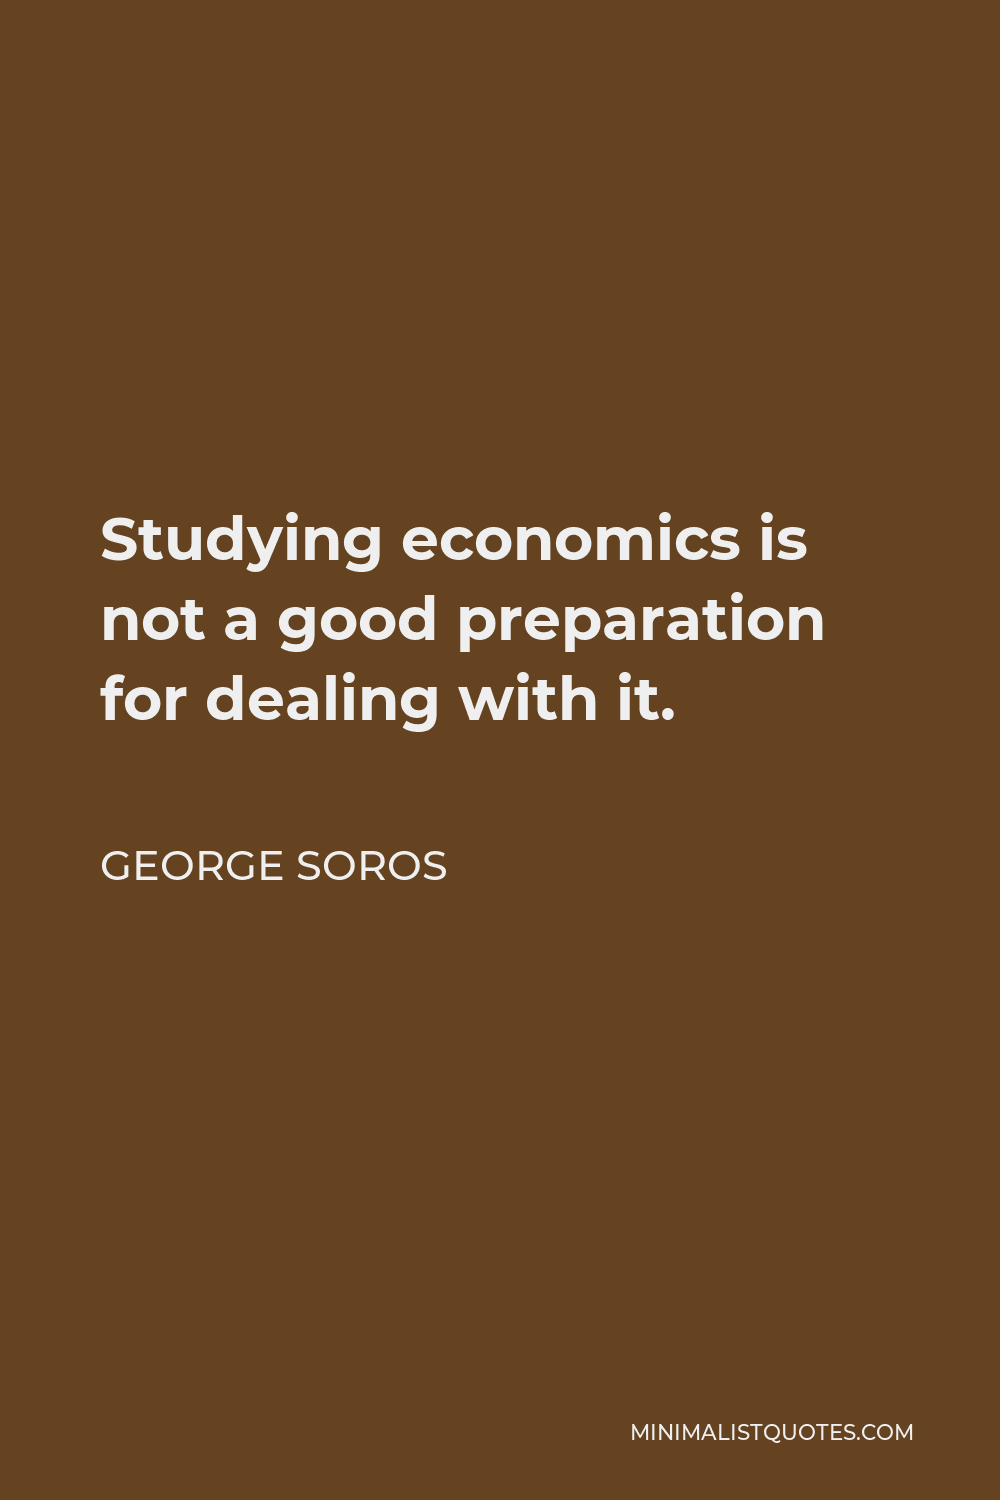 George Soros Quote - Studying economics is not a good preparation for dealing with it.